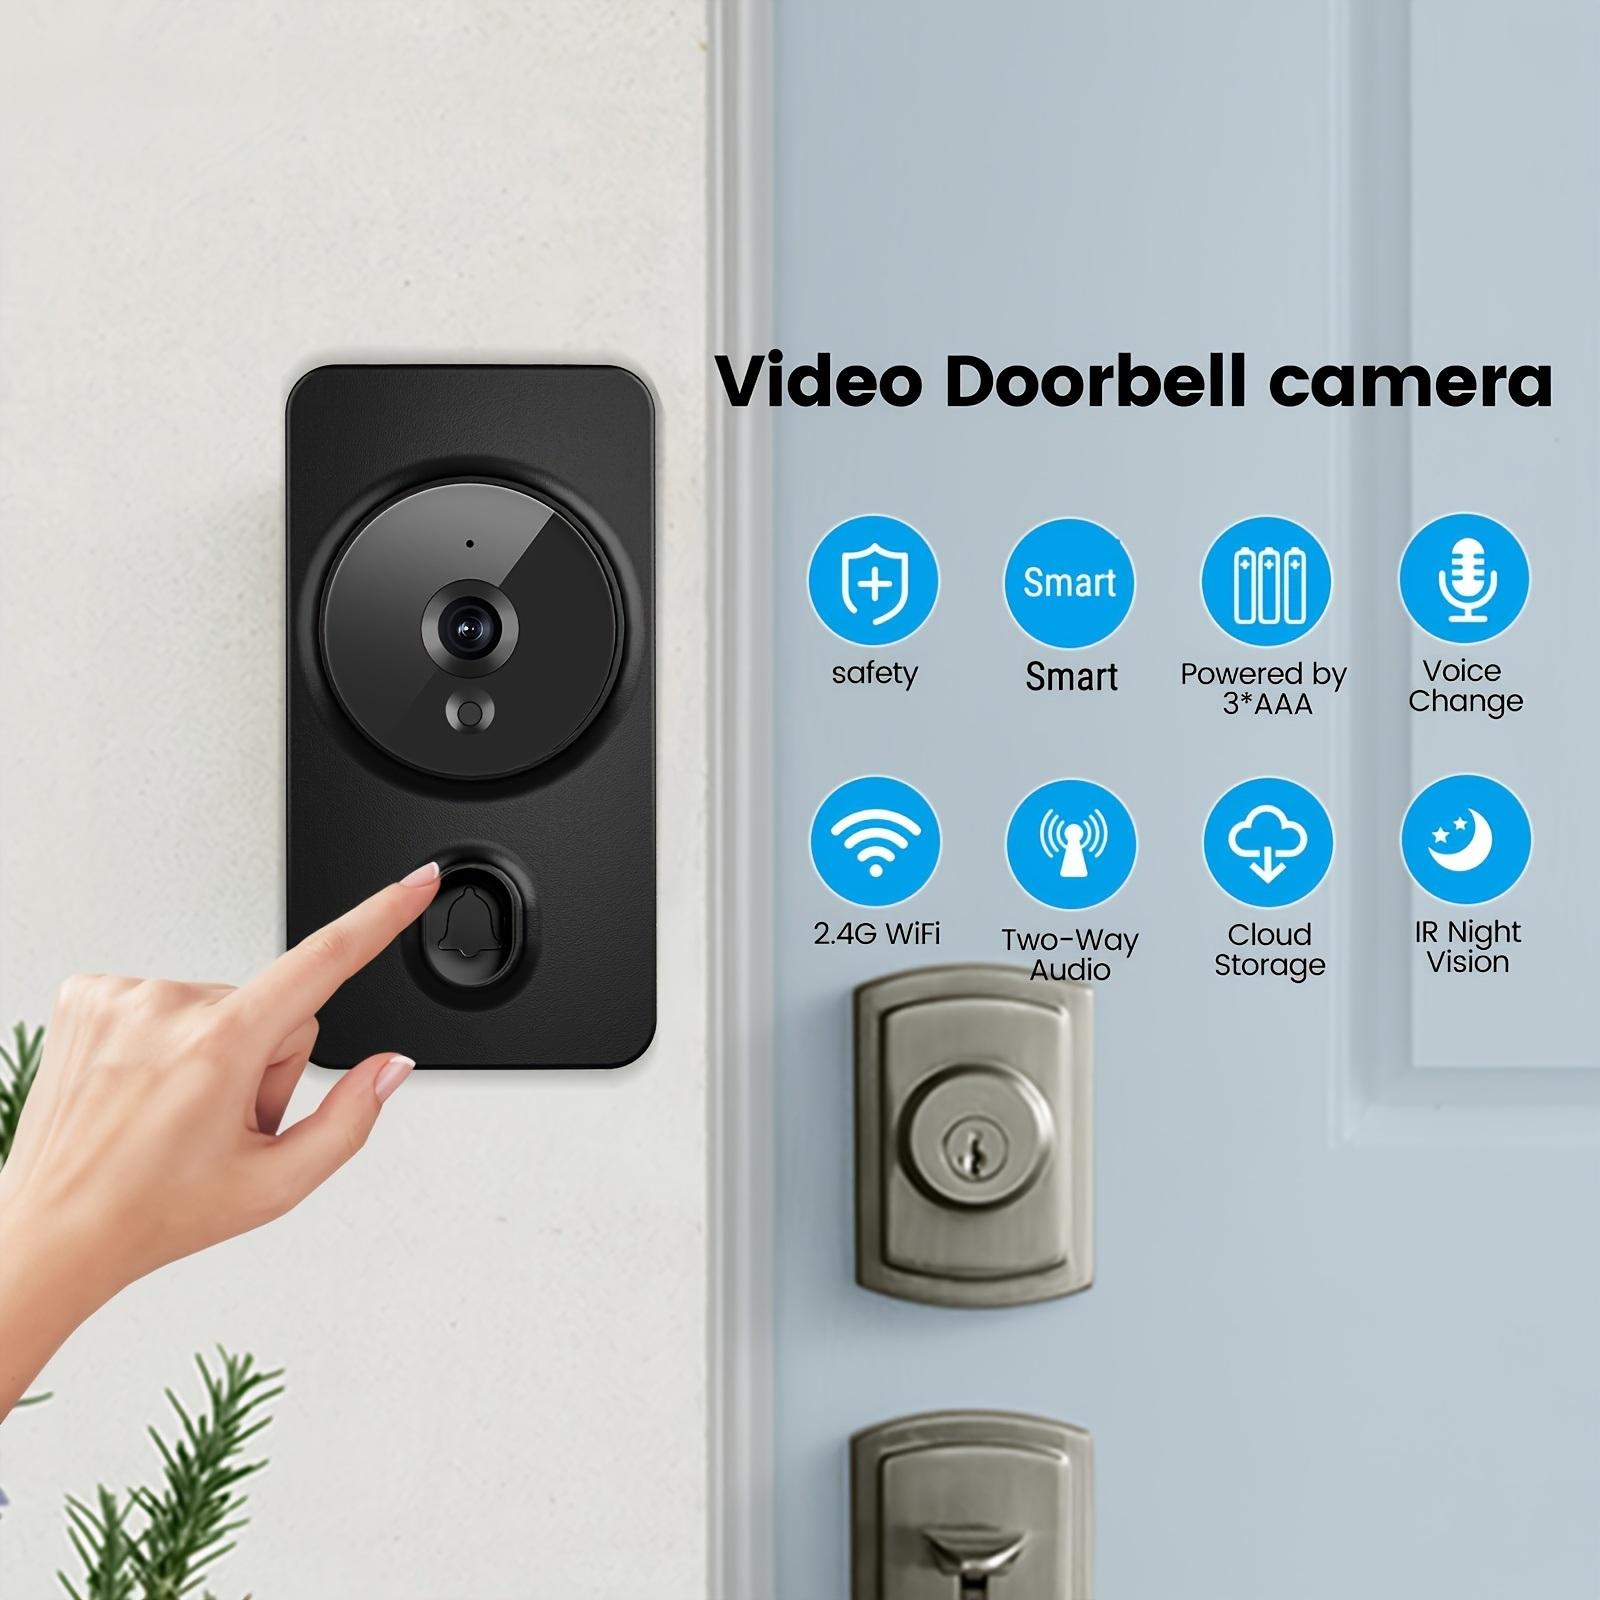 Video doorbell camera with features listed.